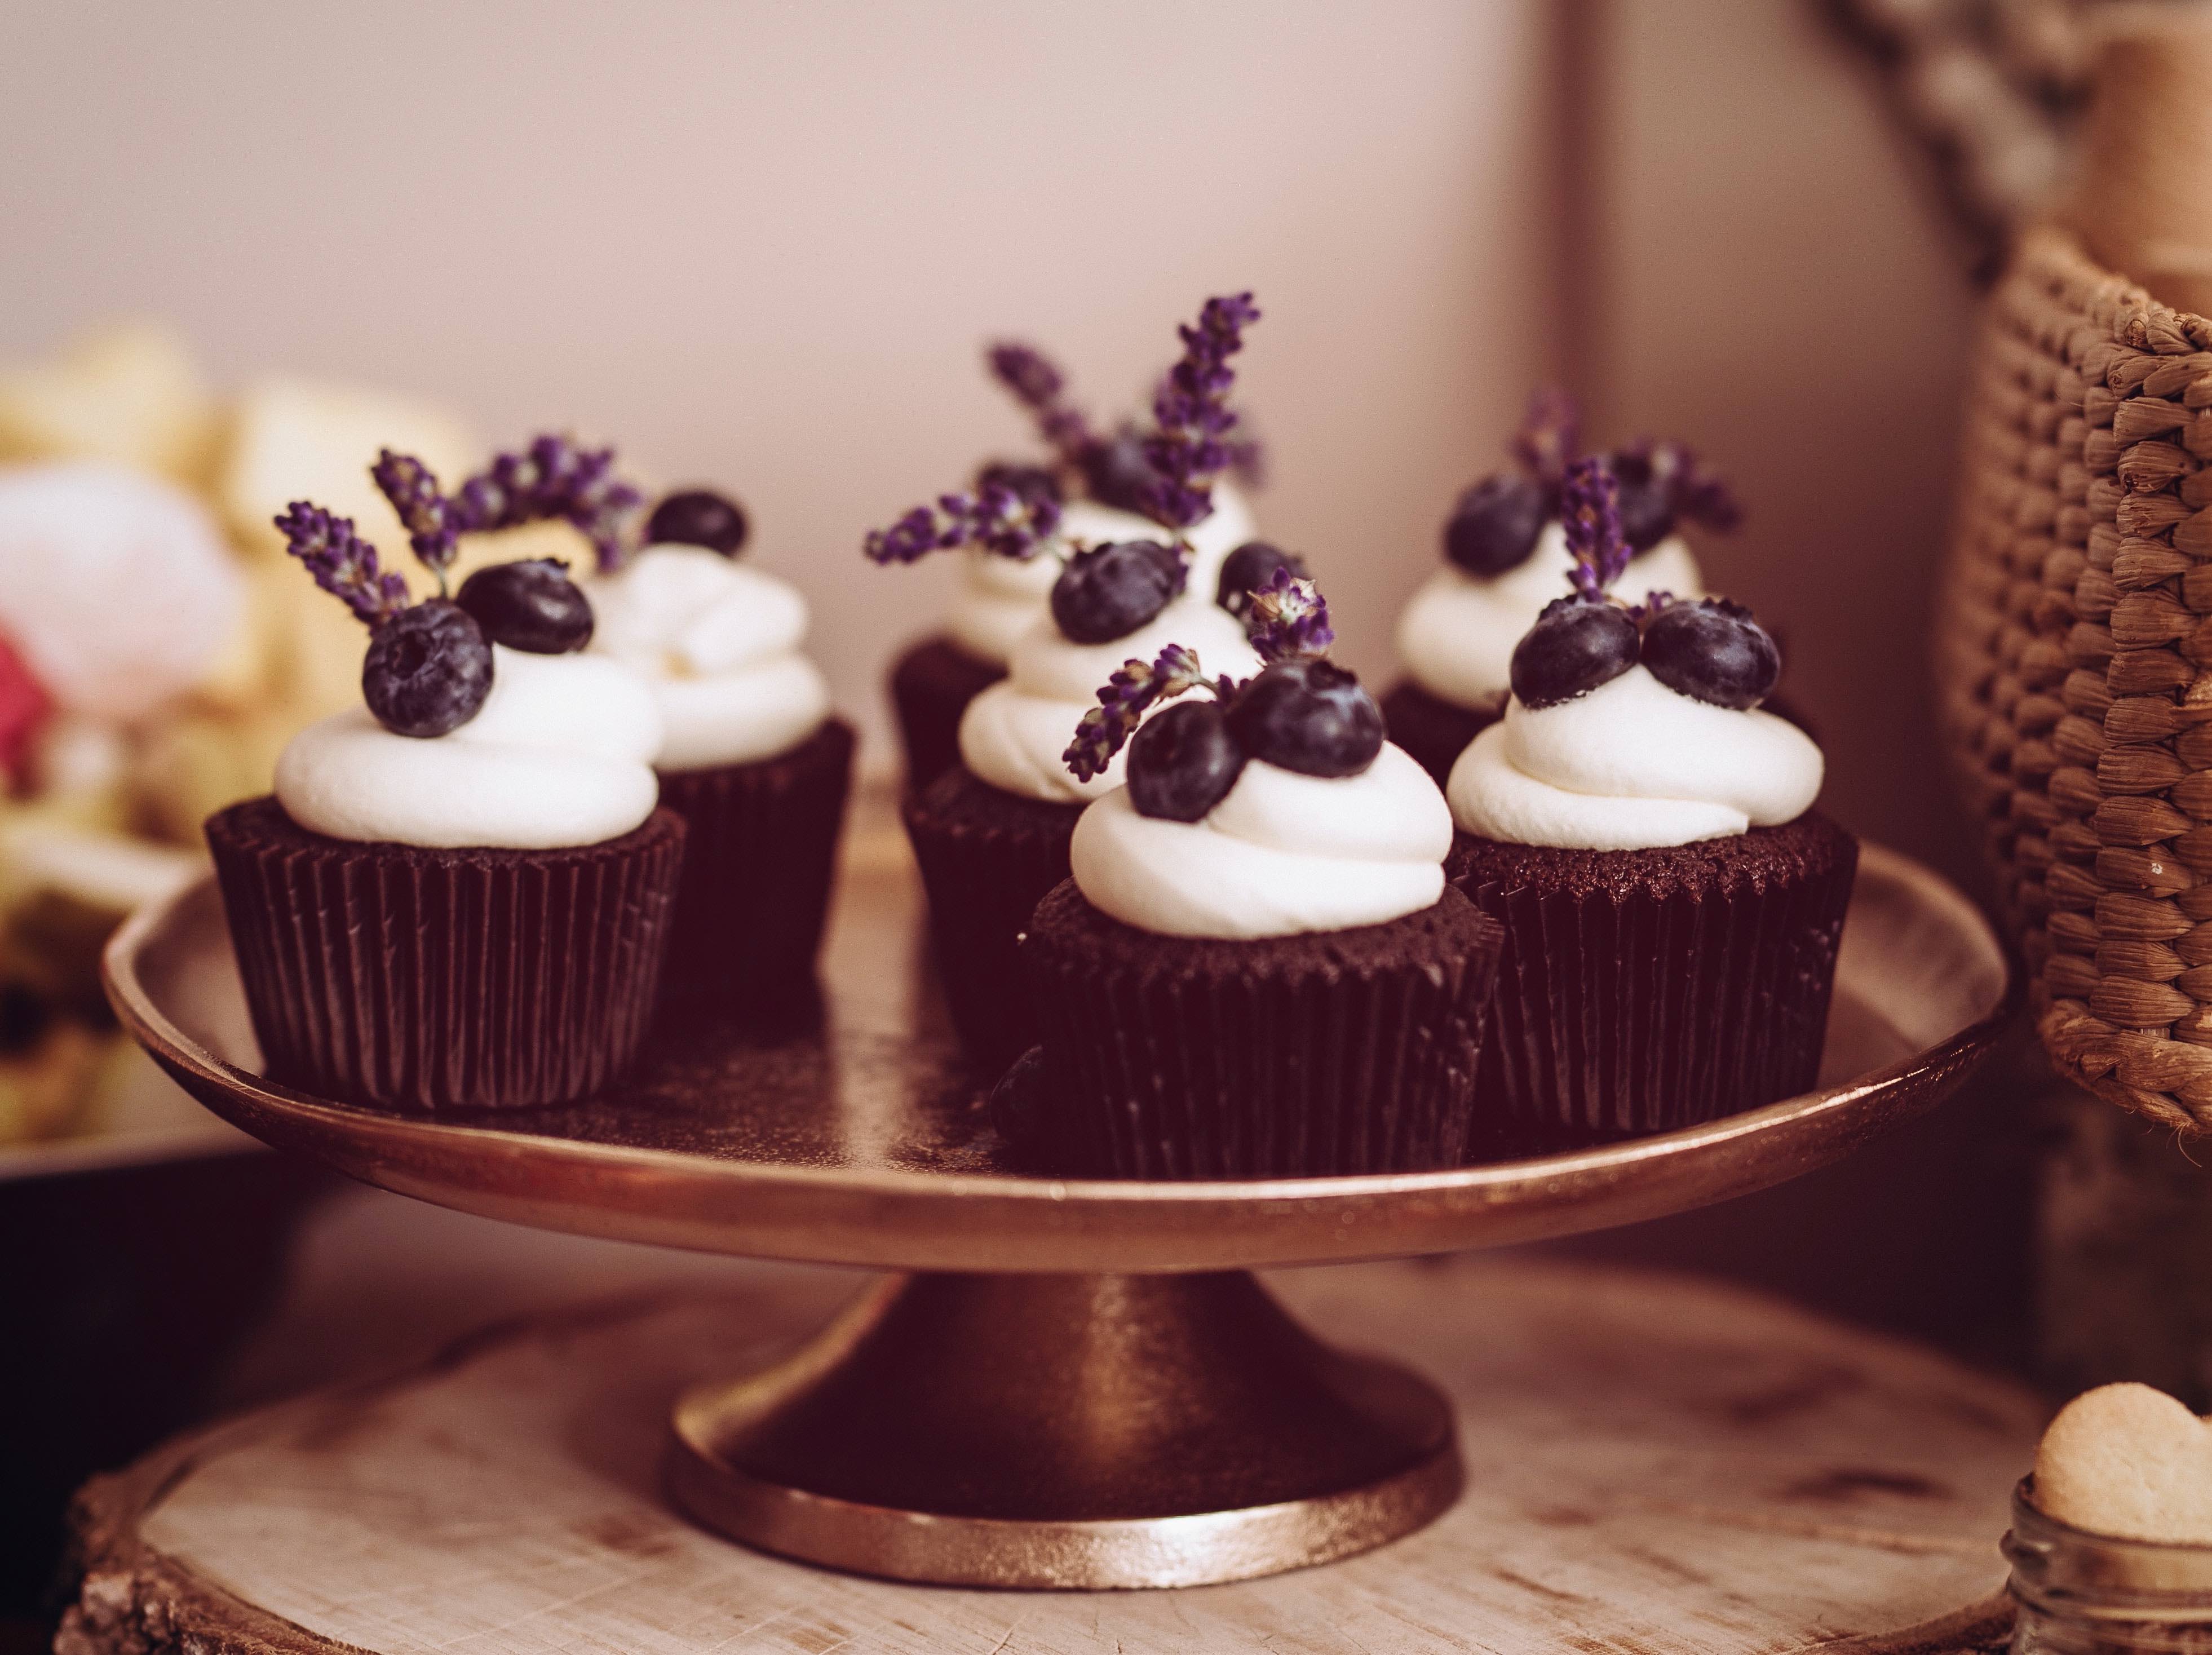 Cocoa muffins with whipped cream and blueberries